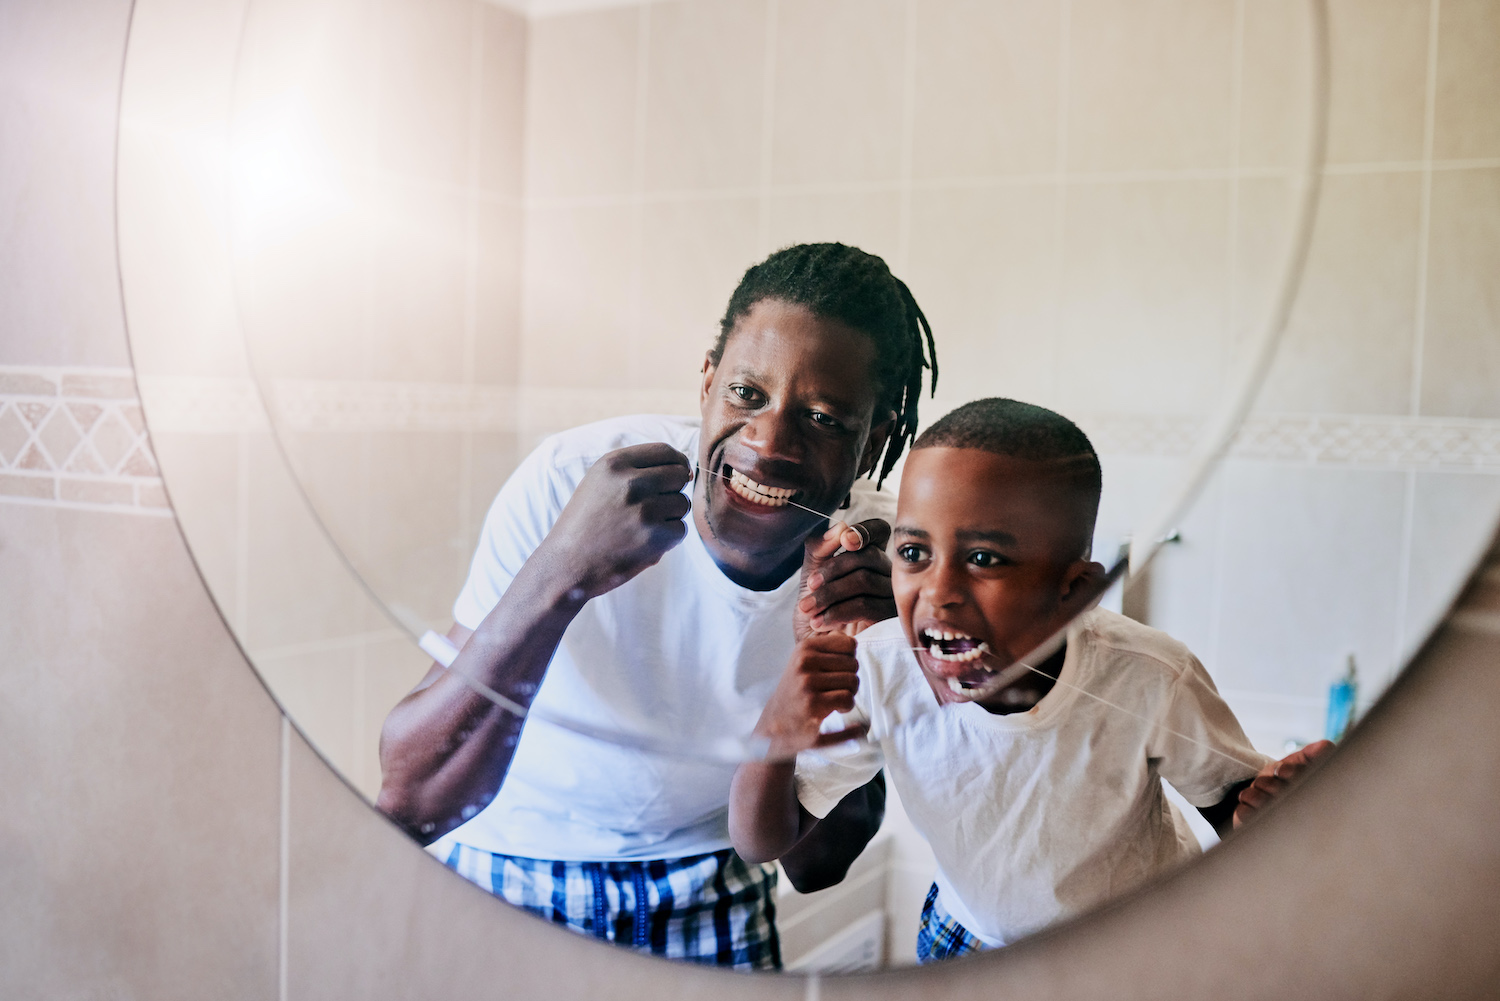 Dad and his son floss together while looking in the bathroom mirror